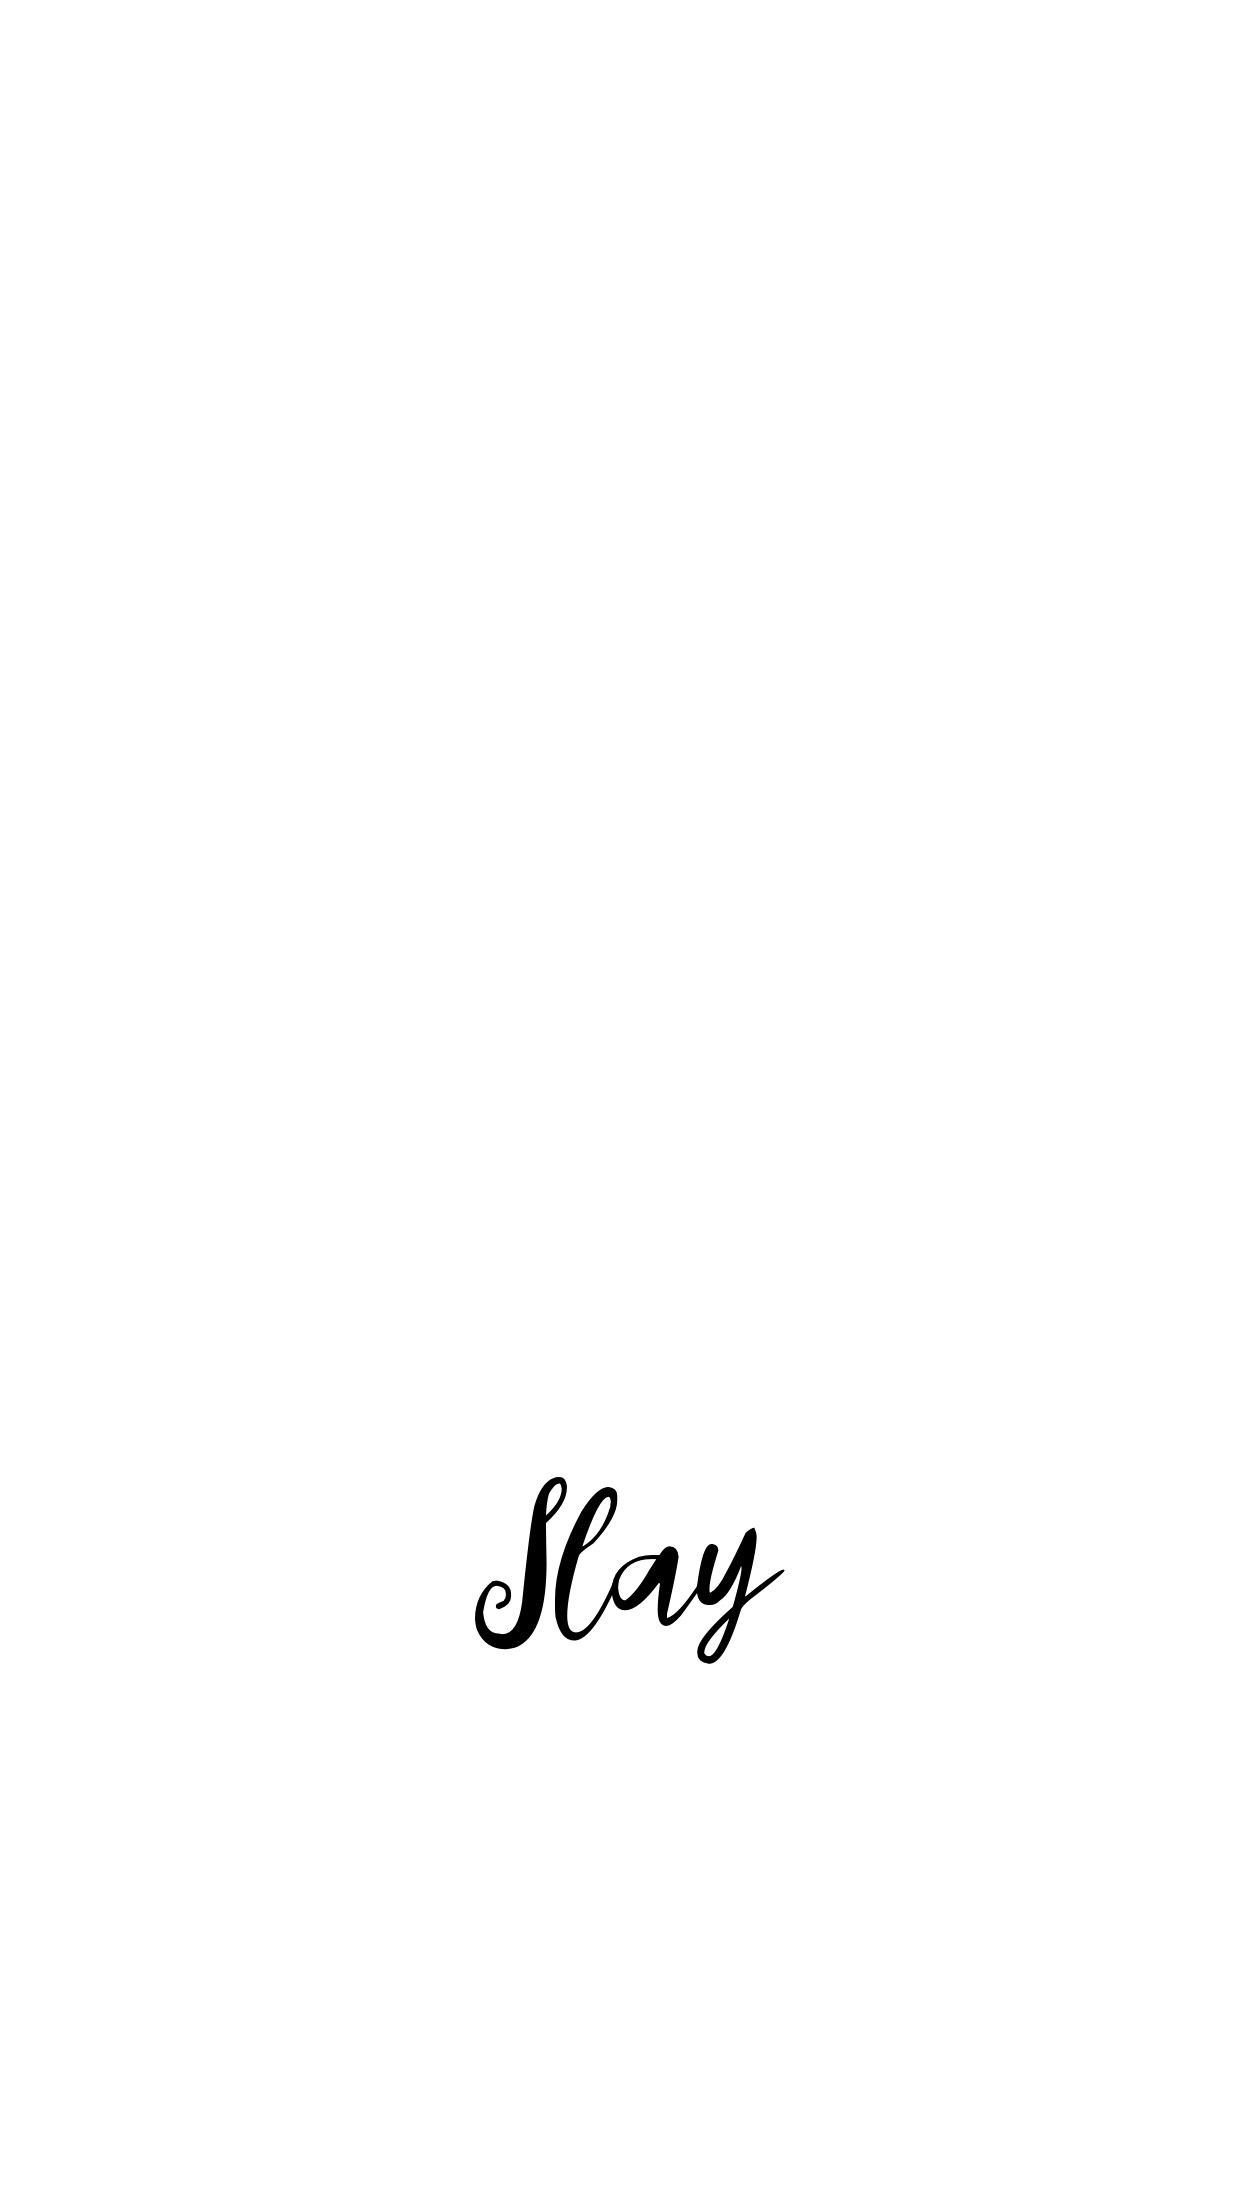 Slay Images | Free Photos, PNG Stickers, Wallpapers & Backgrounds - rawpixel